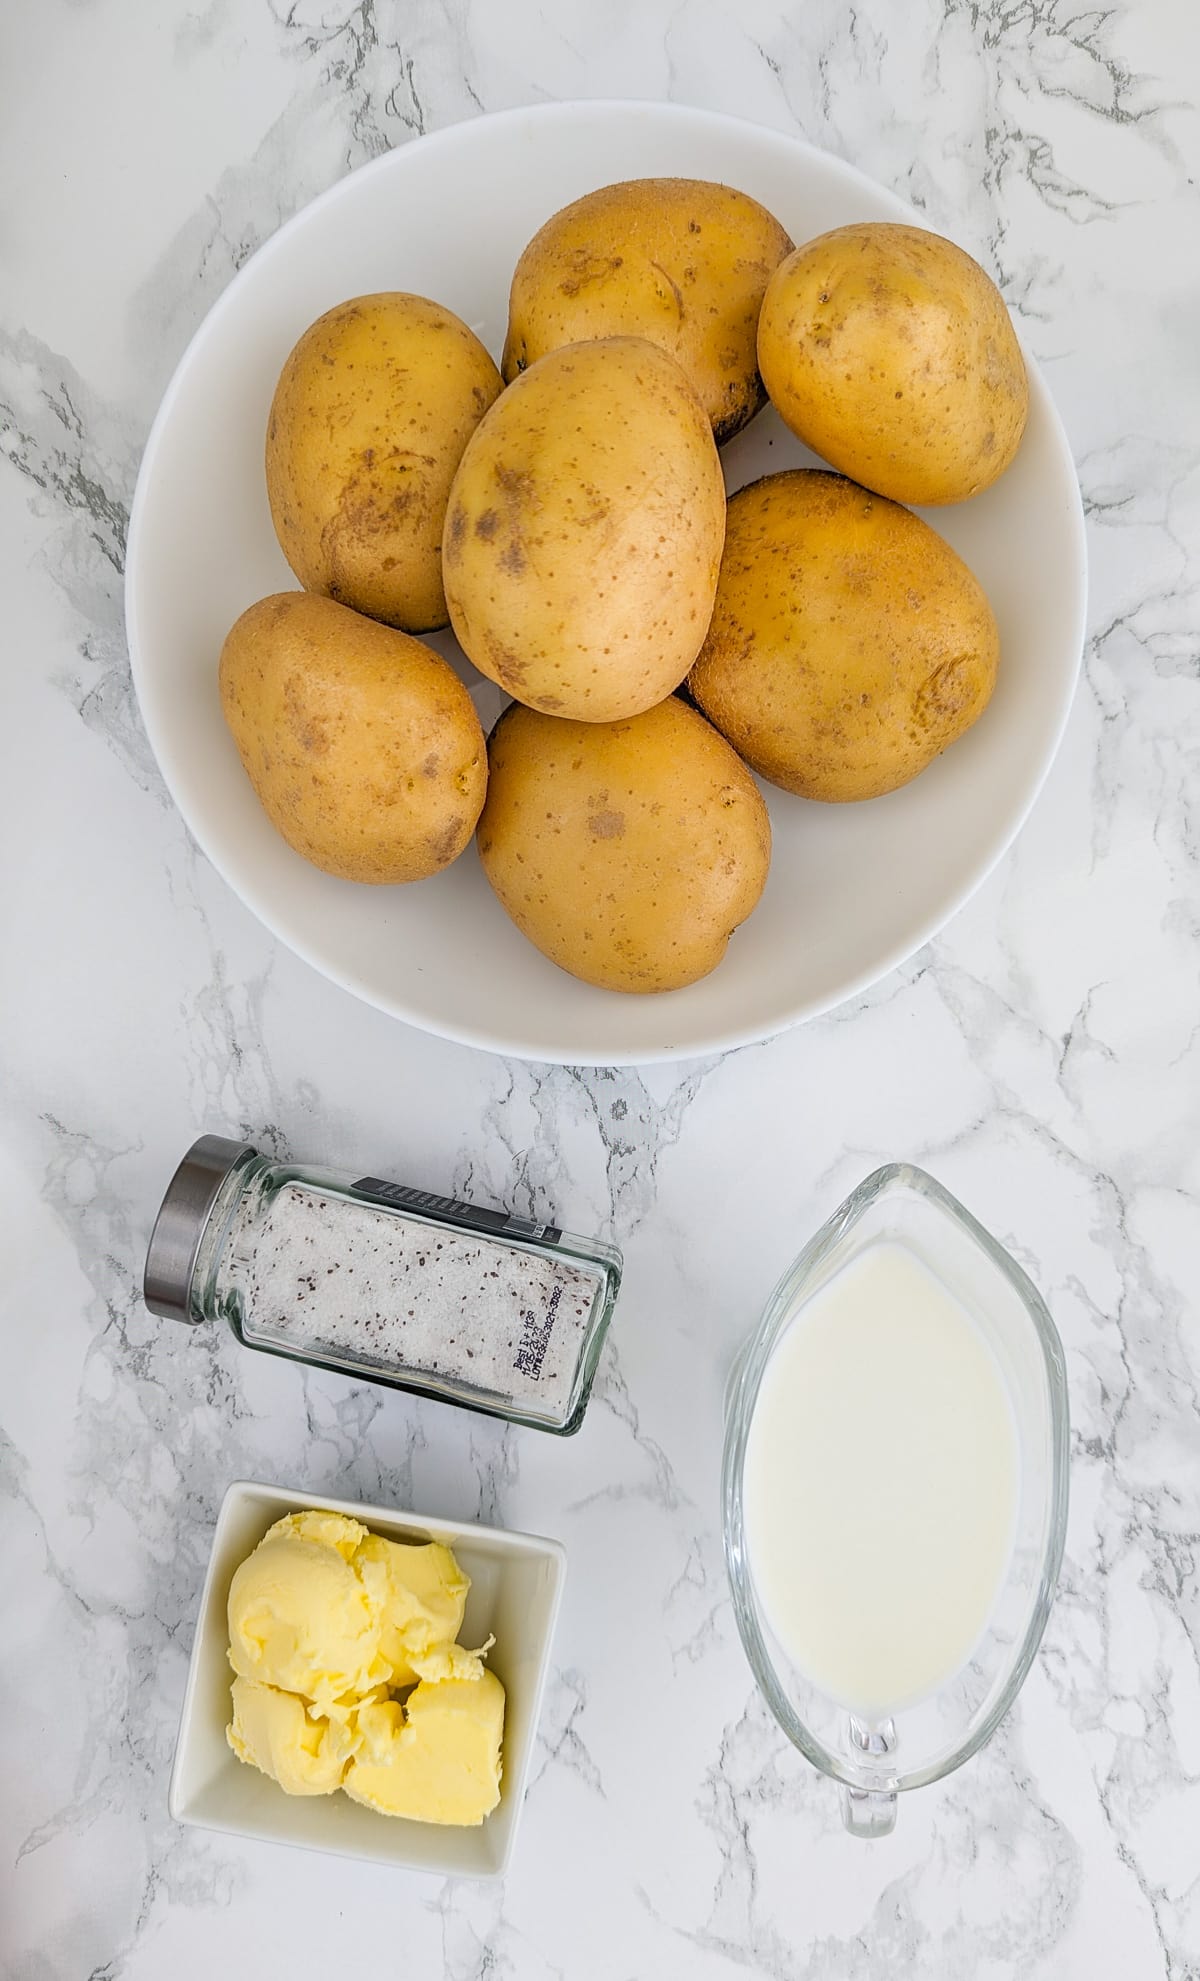 Top view of 7 white potatoes on a white plate near butter, and milk.